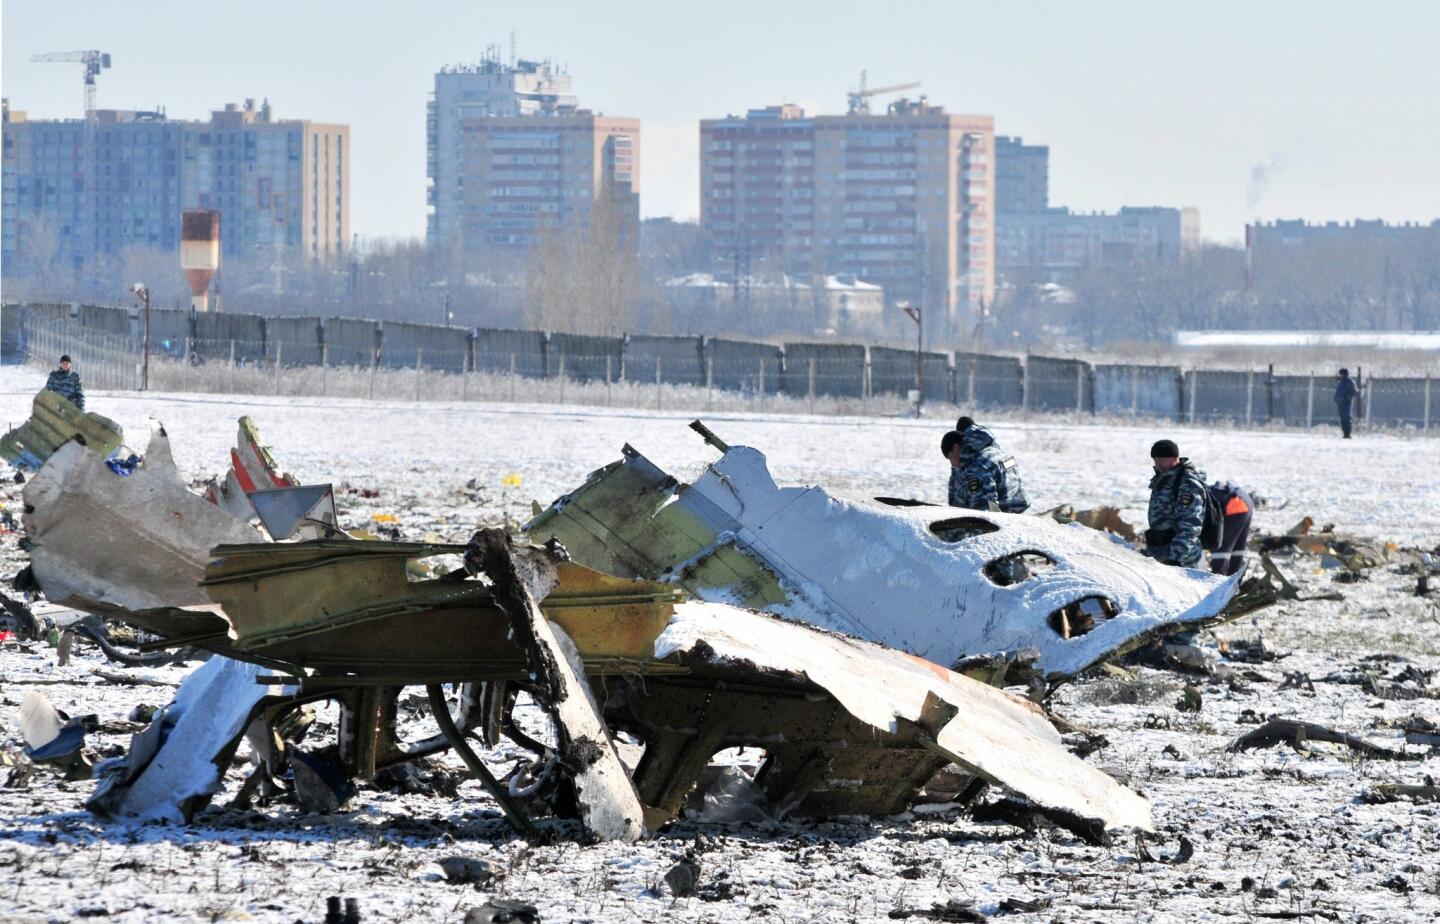 Russian investigators and policemen collect remains of bodies and inspect a site of the crash of Boeing 737-800 of FlyDubai airliner at the airport of Rostov-on-Don, Russia, on March 20, 2016. Sixty two people (55 passengers and 7 crew members) died in the crash. The Boeing 737-800 crashed in the second approach of landing in very bad weather conditions.